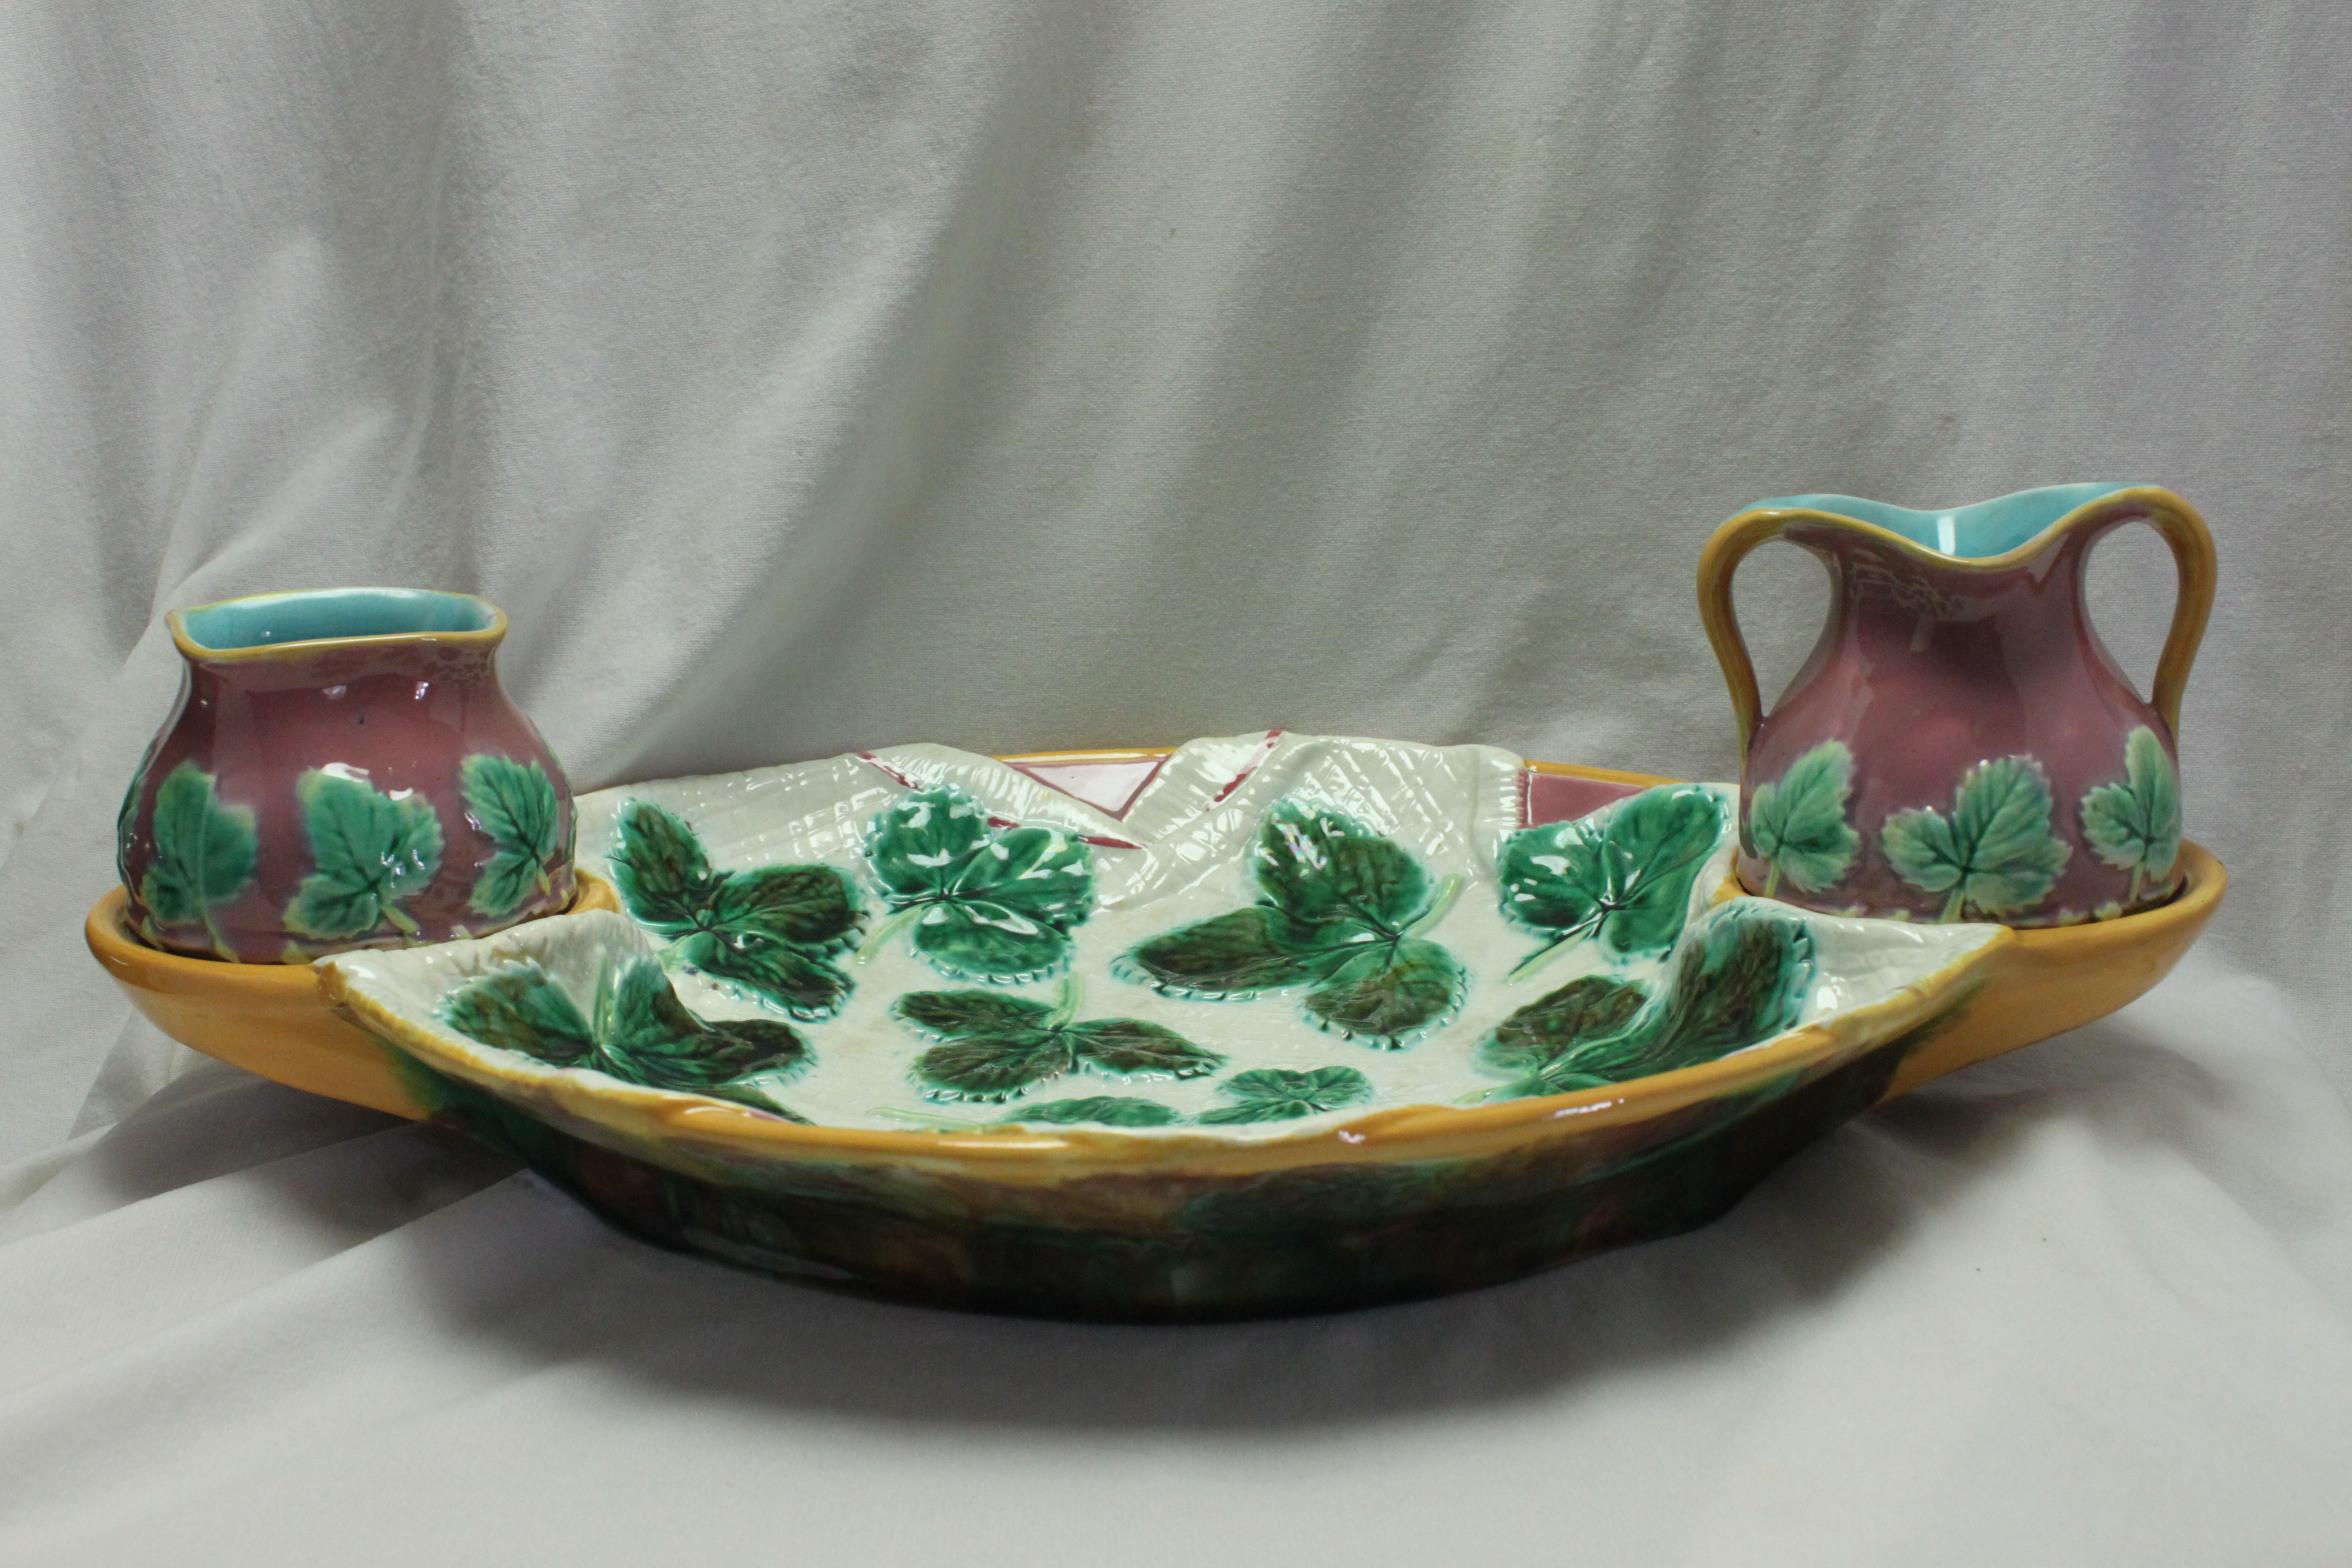 This three piece majolica strawberry set by George Jones features an oval tray with open rings at the ends which hold a small pot of sugar and one of cream. The centre is decorated with a trompe l'oeil effect of a folded napkin scattered with